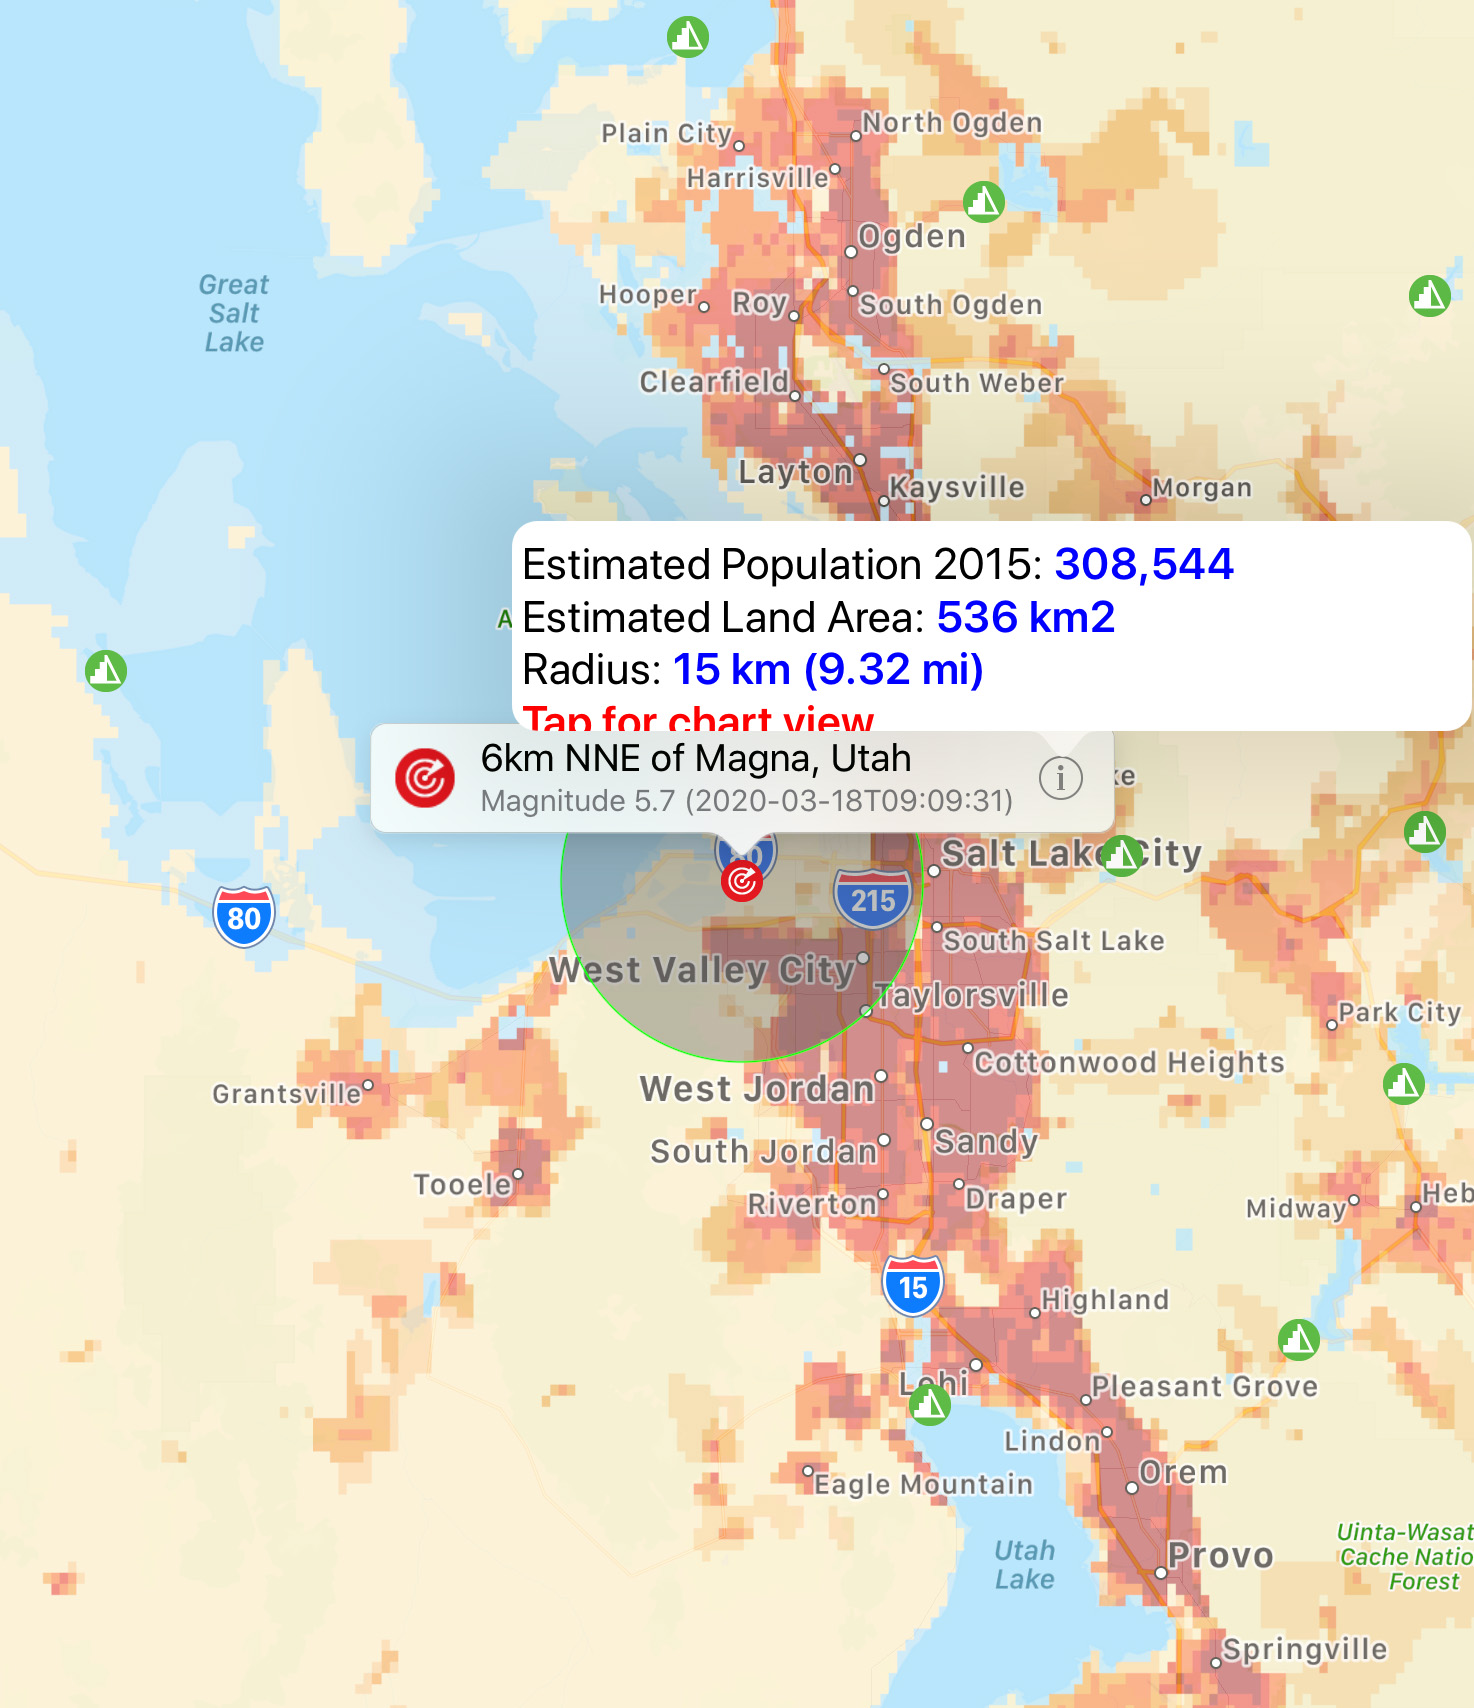 Estimated population in the region (data from 2015) within a radius of a) 15 kilometers and b) 30 kilometers of the March 18th, 2020 earthquake centered near Magna, Utah. 